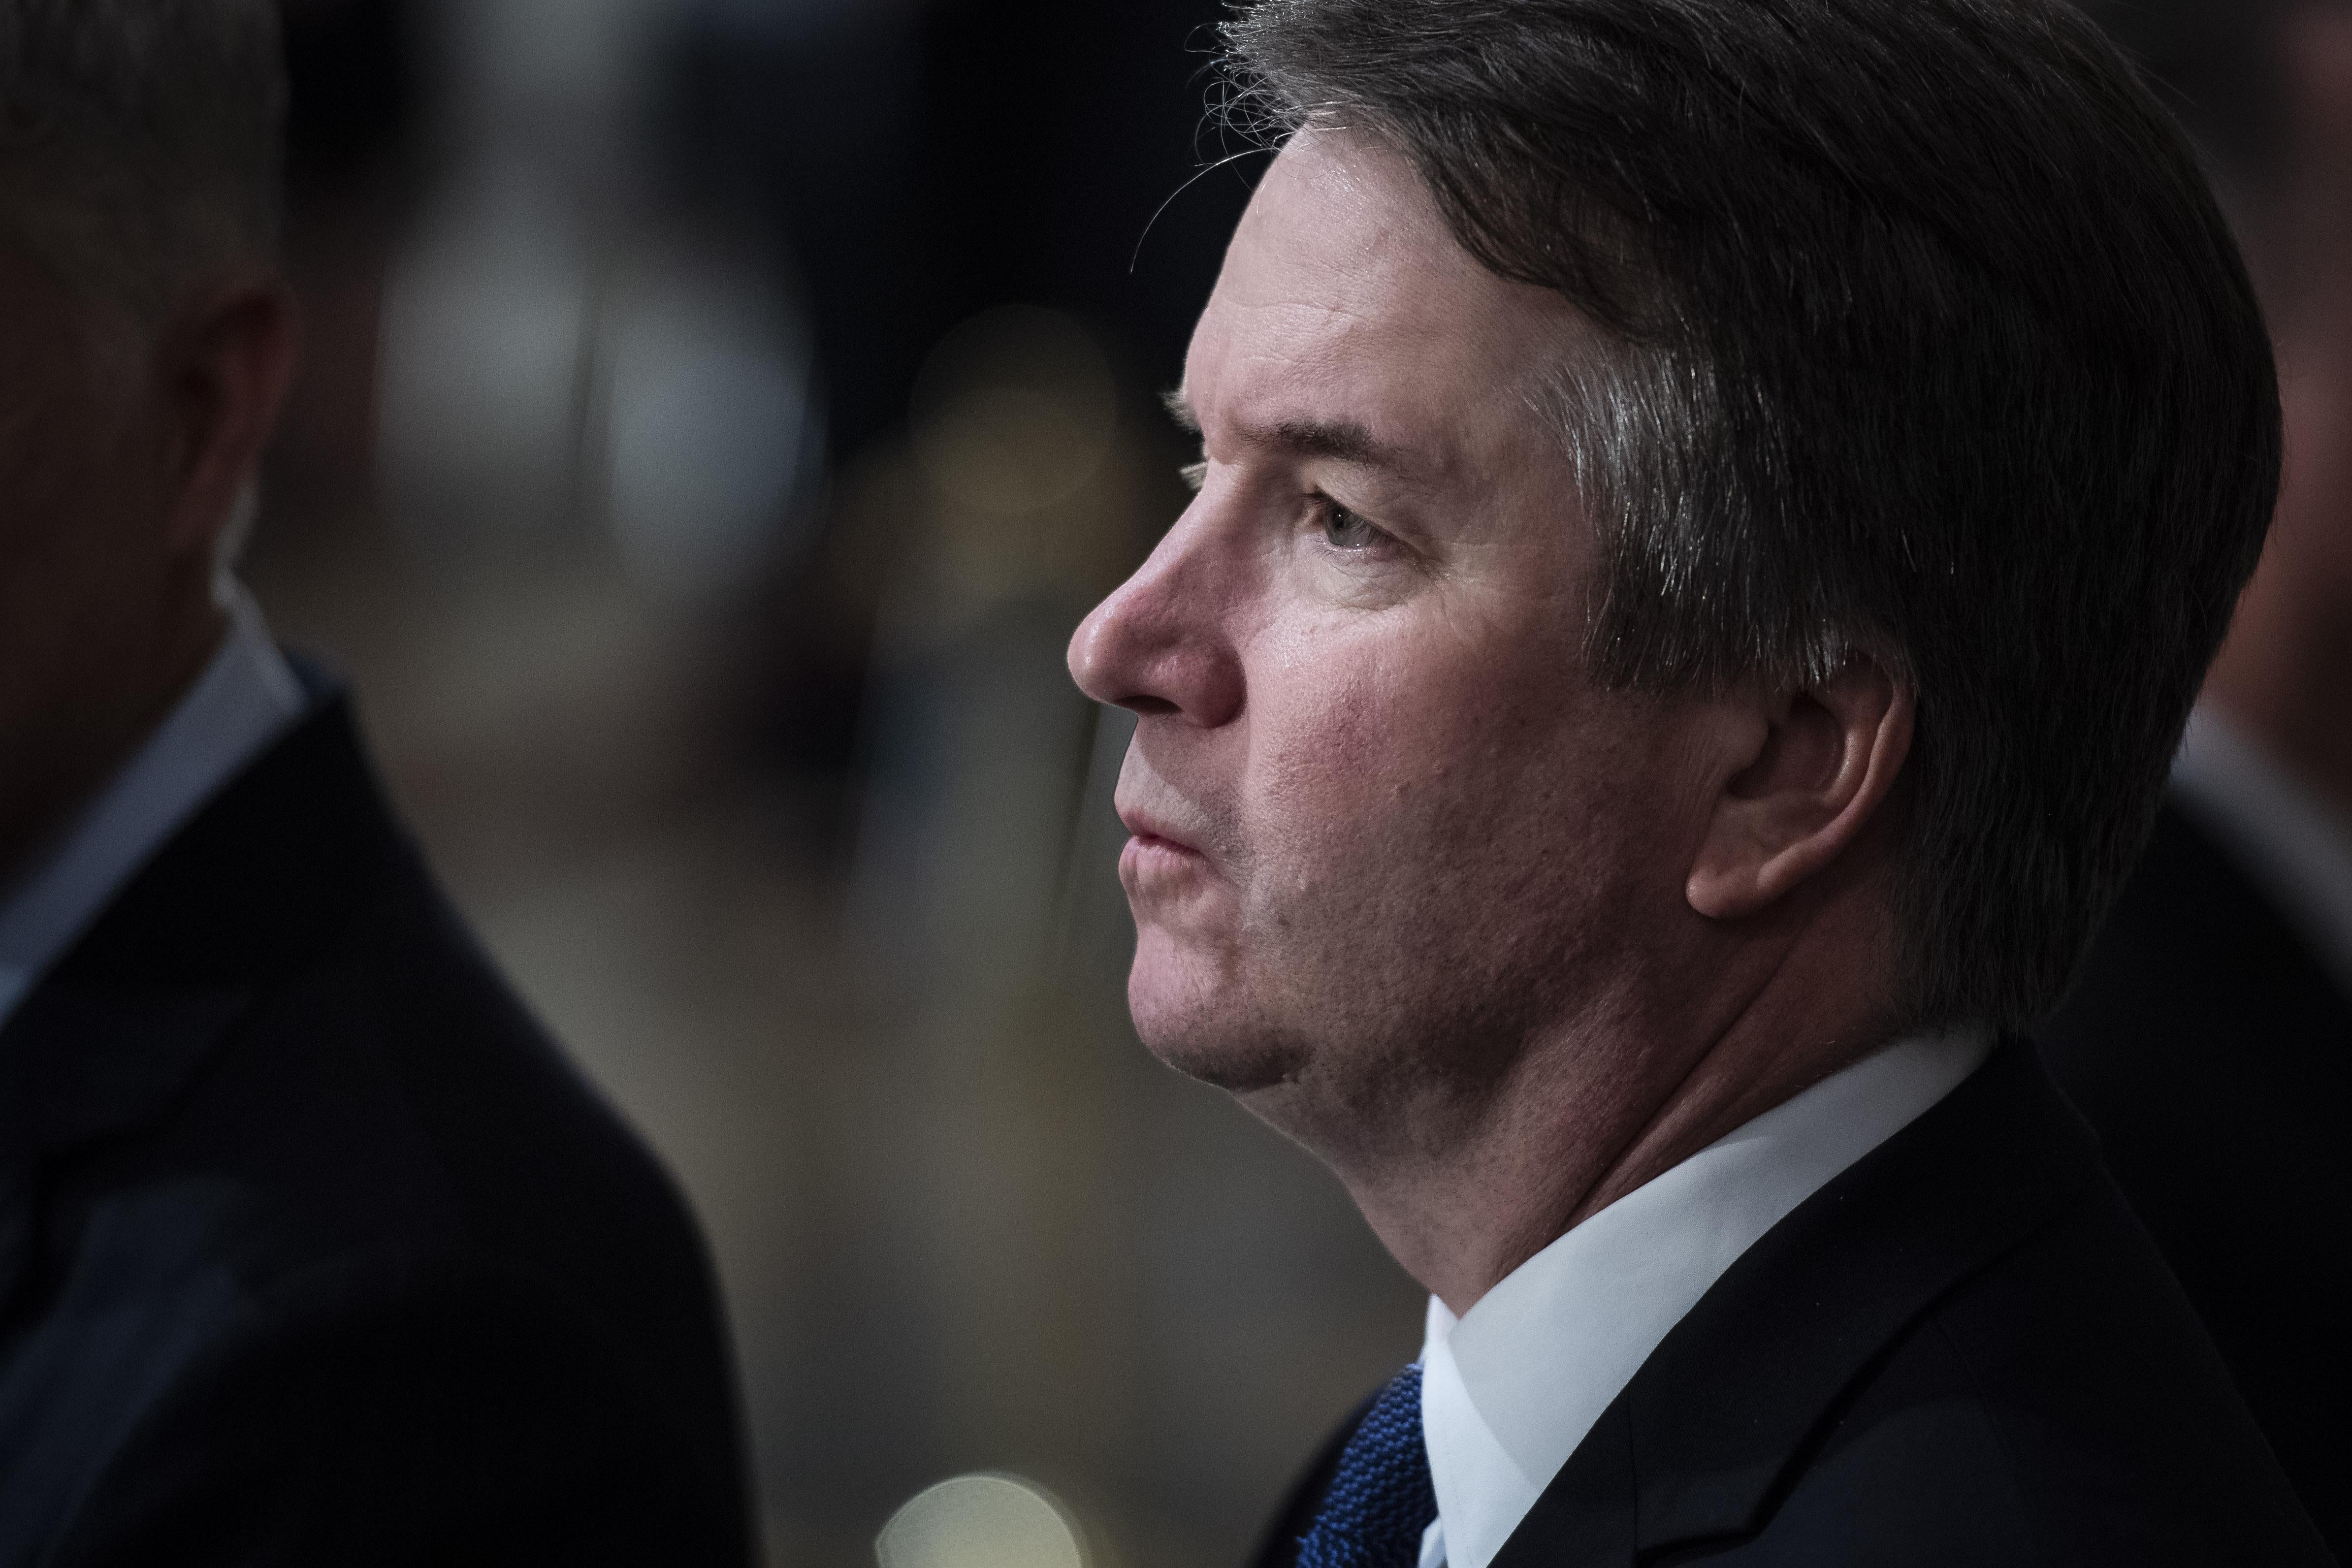 A close-up of Kavanaugh staring grimly.